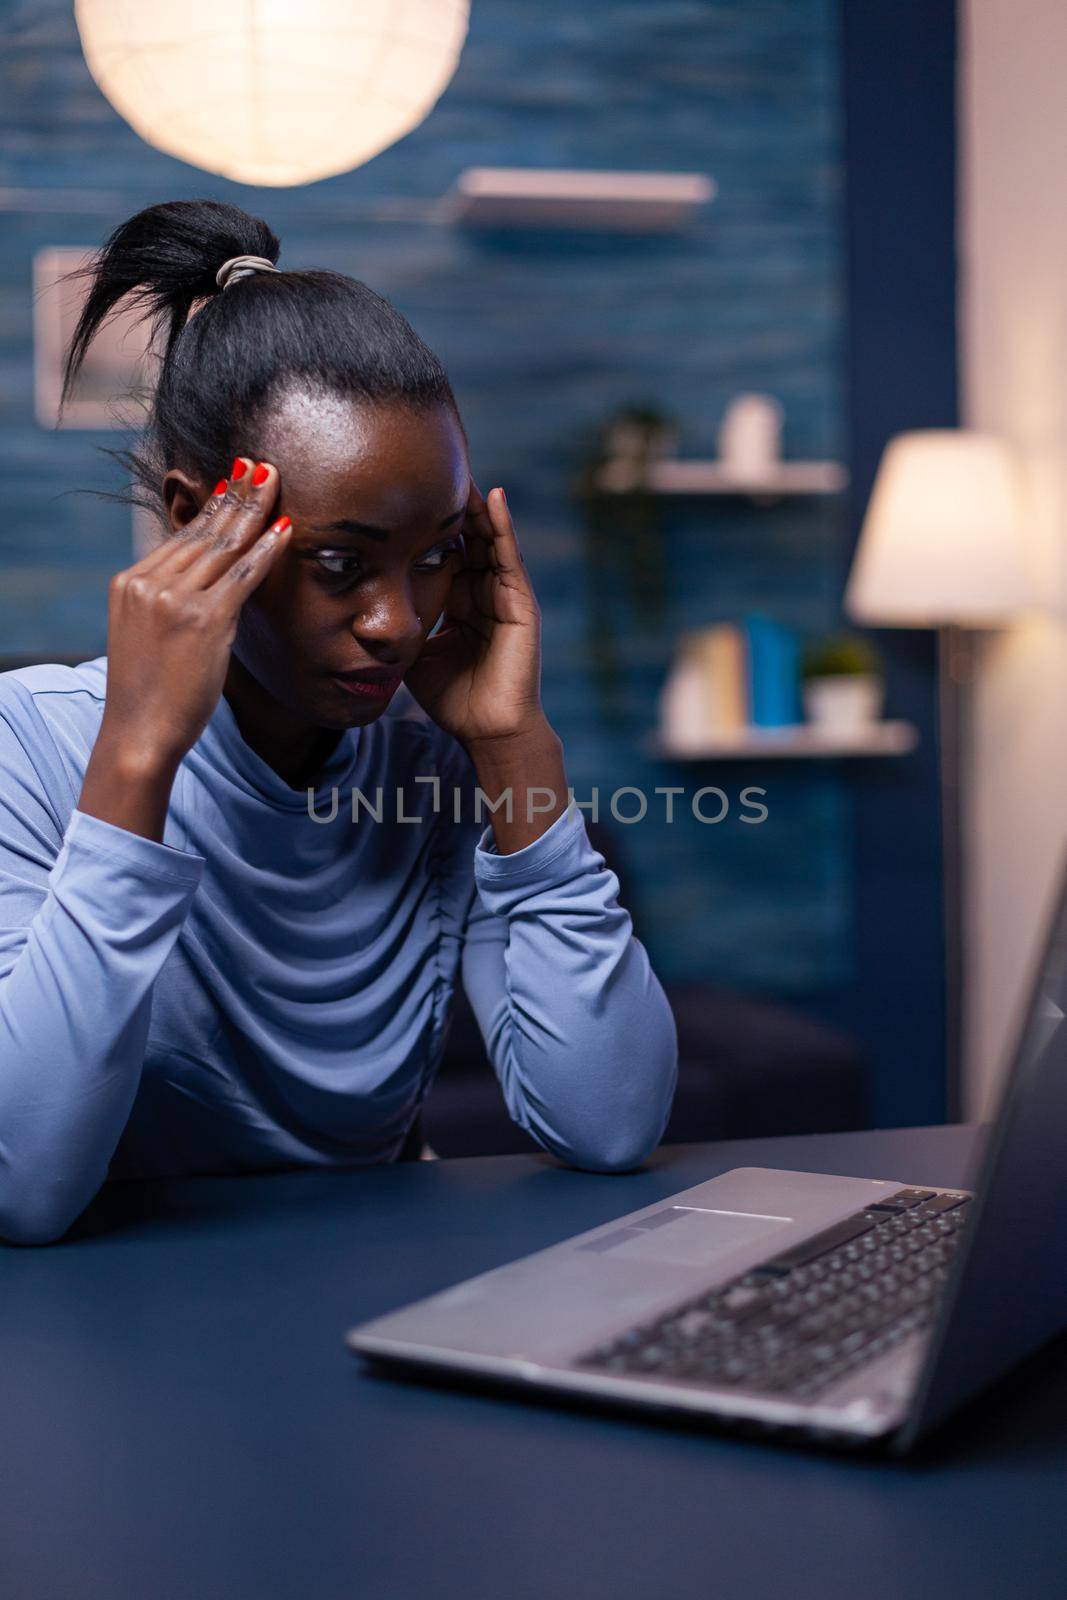 Overworked african business woman having a headache while working late in the night from home office. Tired focused employee using modern technology network wireless doing overtime.